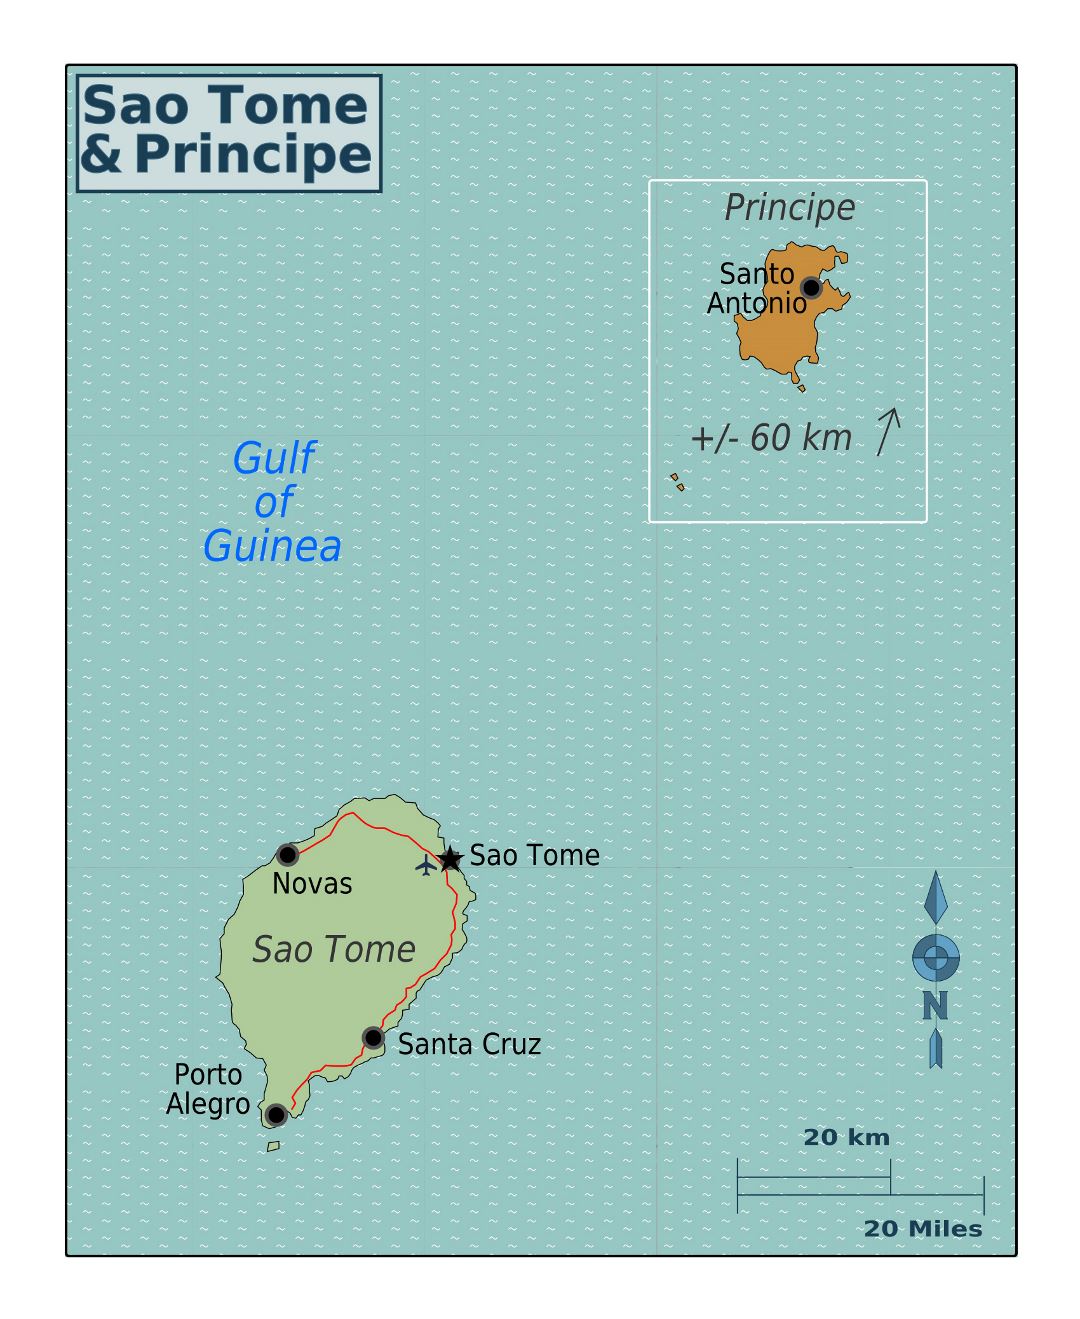 Large regions map of Sao Tome and Principe